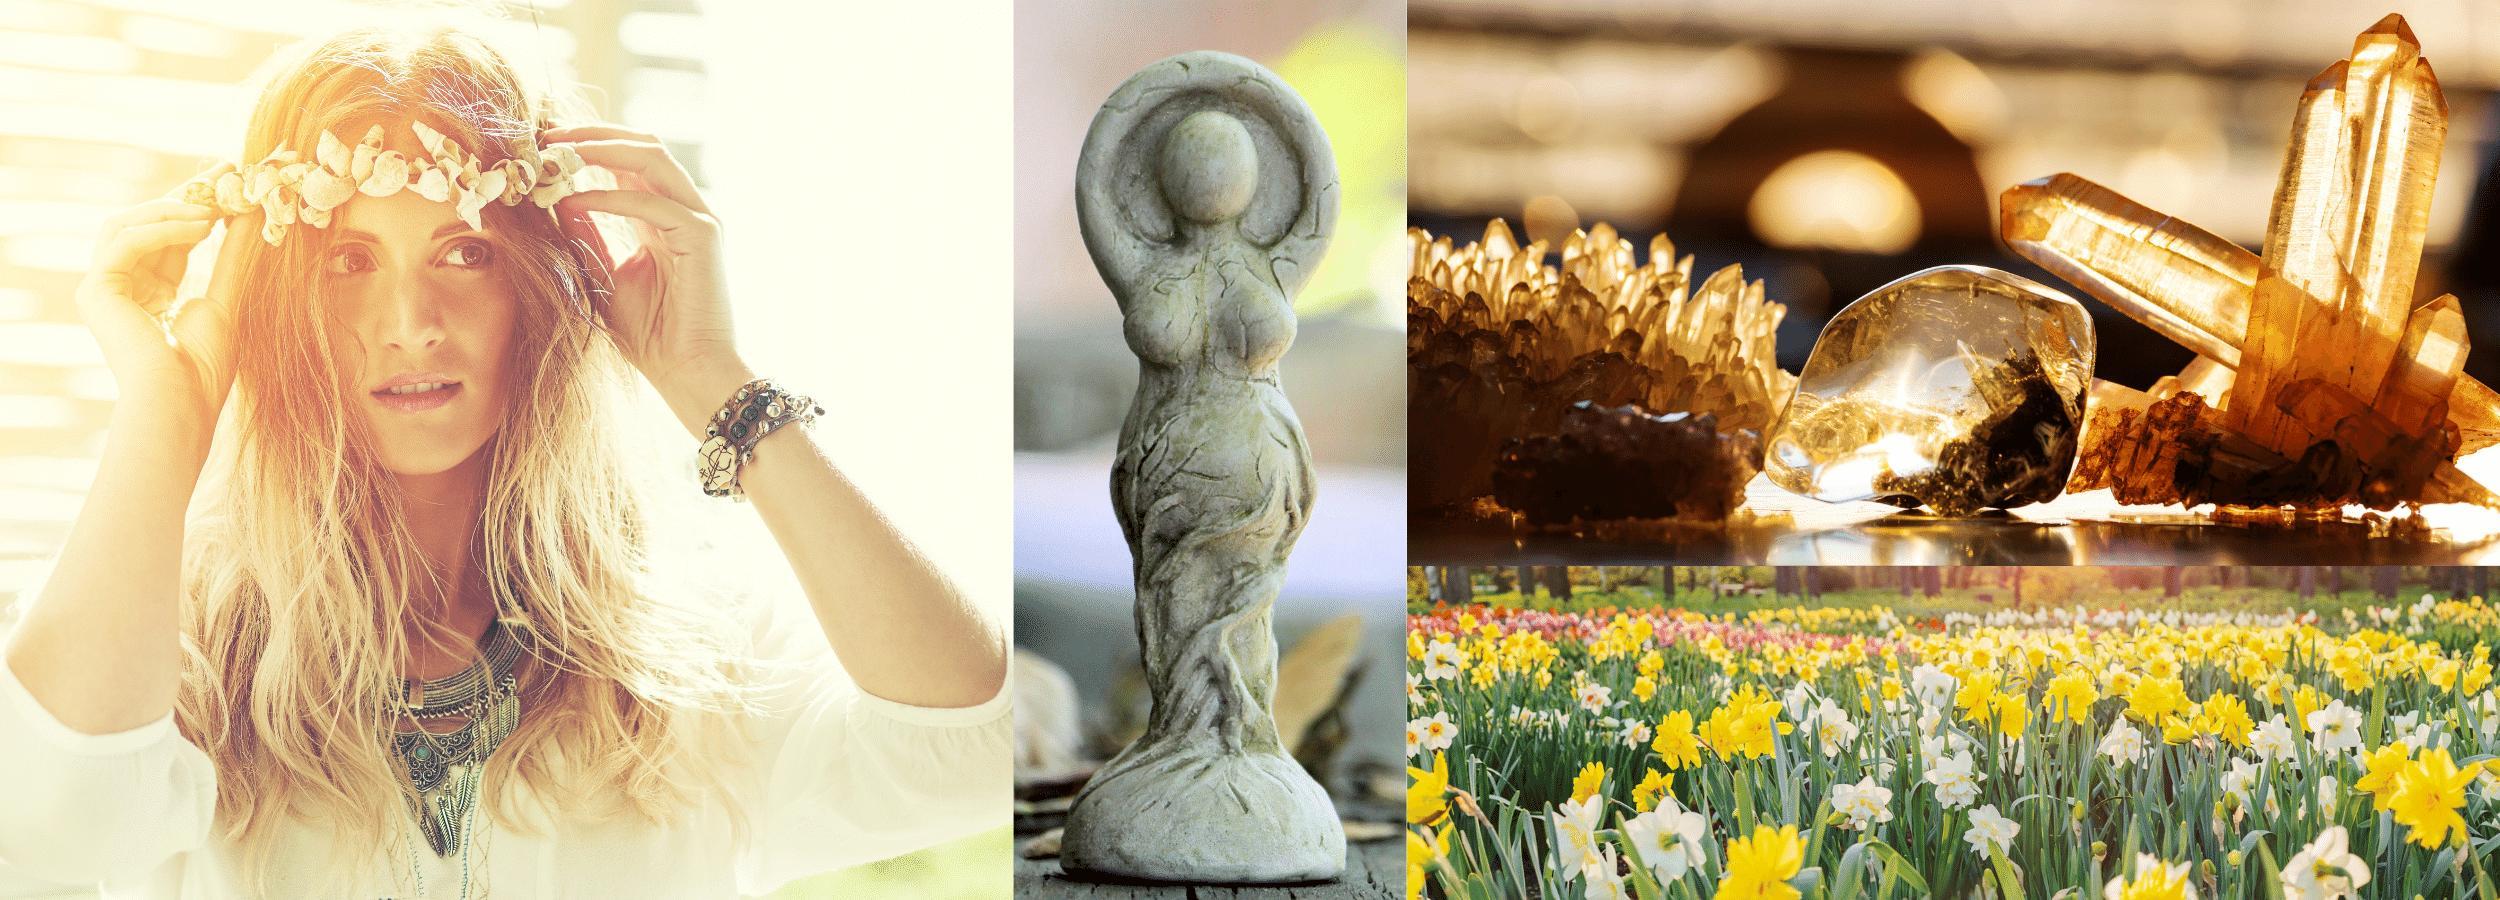 Collage of images to celebrate Imbolc: Goddess Brigid, Imbolc crystals, daffodils